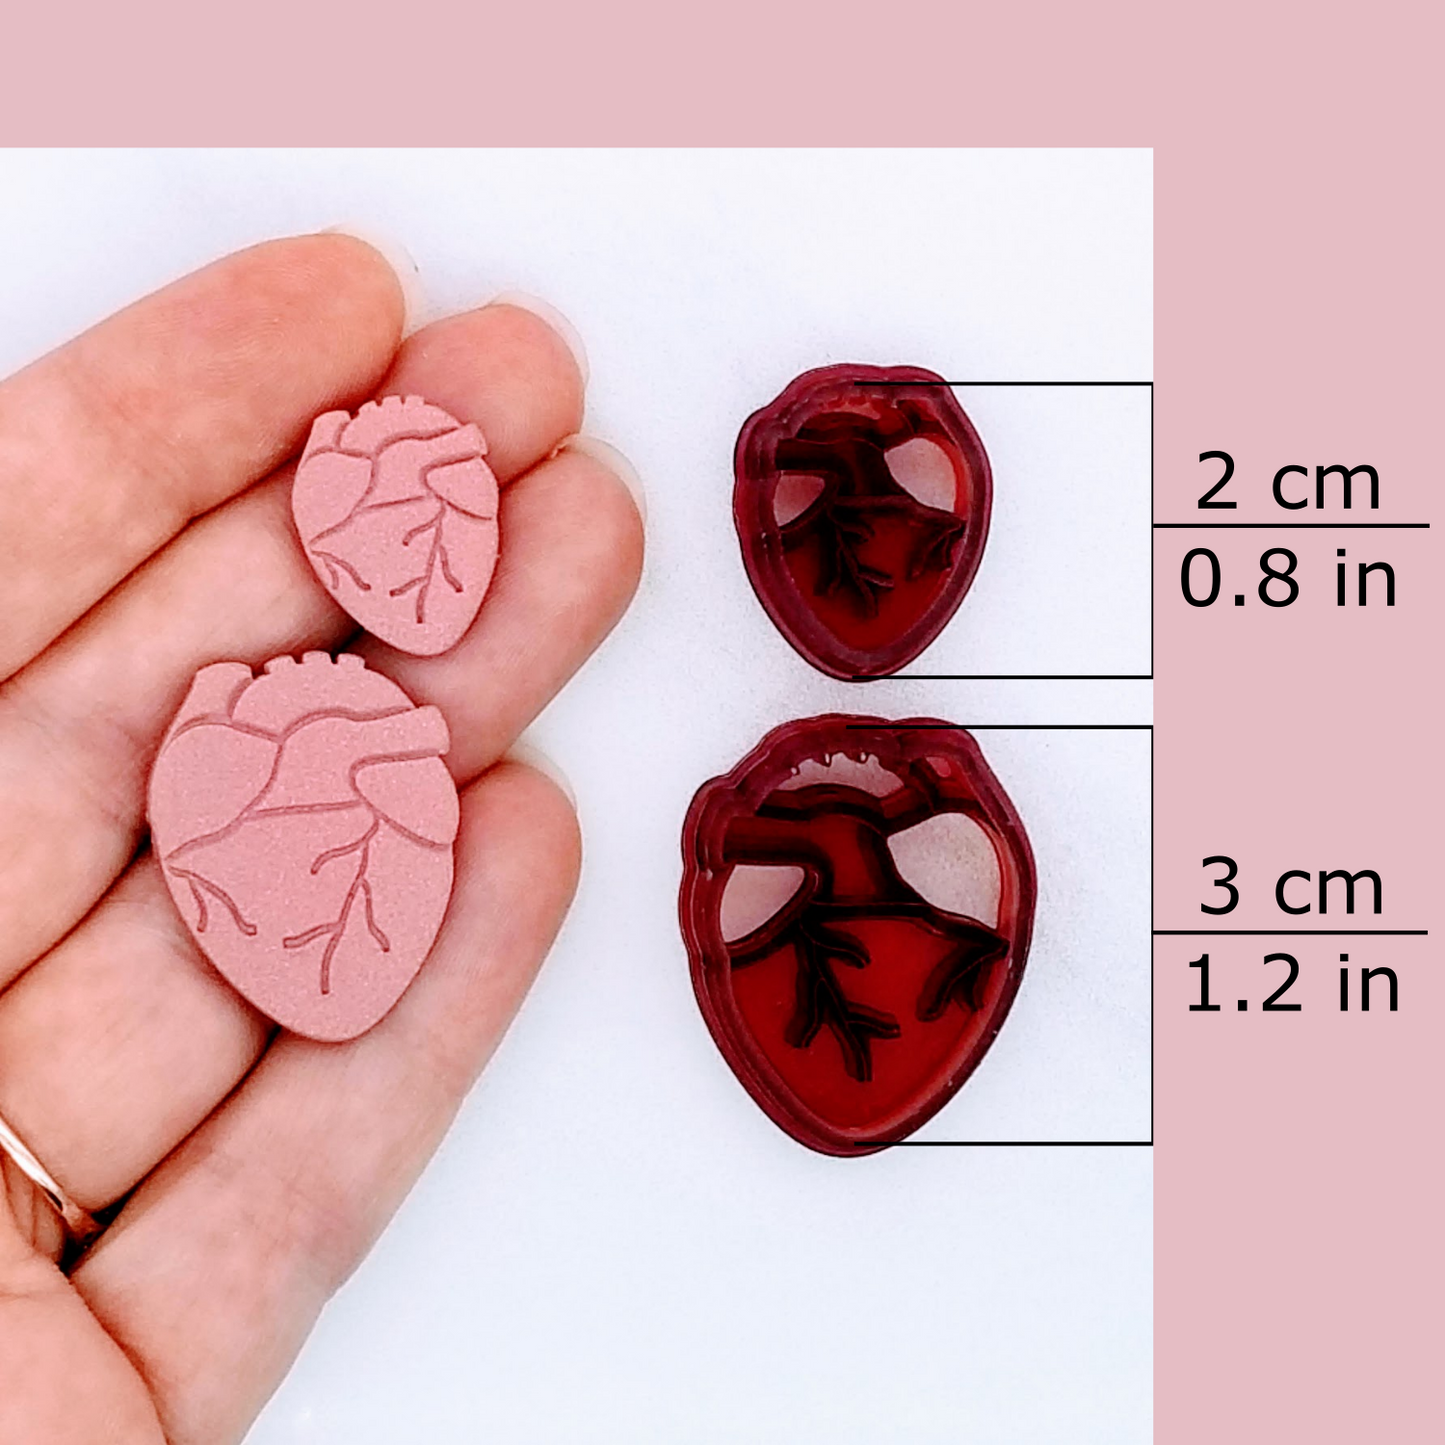 Anatomical heart clay cutter available sizes and sample finish product on polymer clay. Sizes: 2 centimeters / 0.8 inches, and 3 centimeters / 1.2 inches